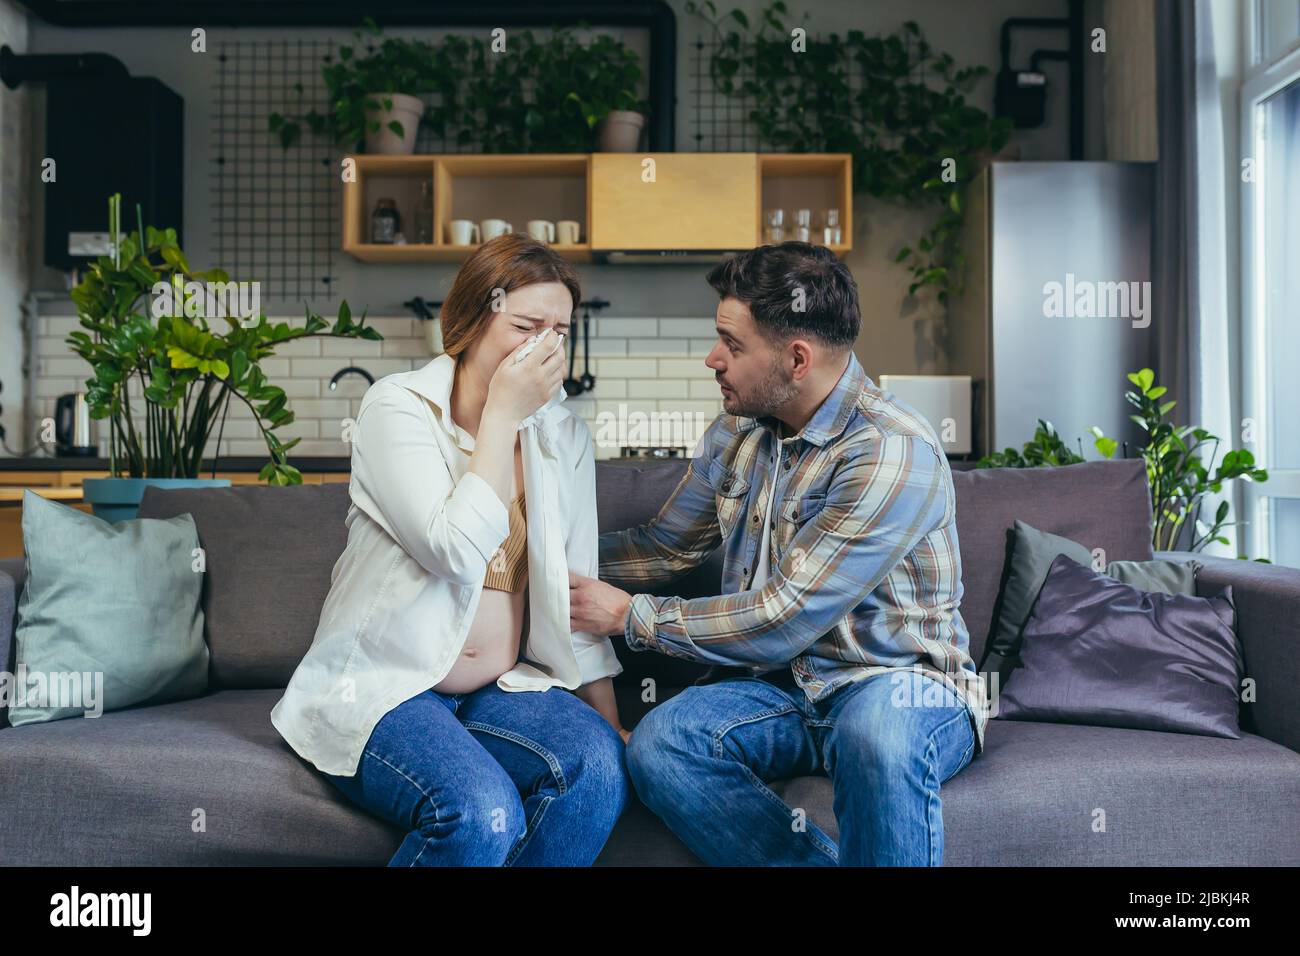 Young pregnant woman crying, wipes tears with a napkin. The man calms her down, supports her. Sitting at home on the couch. Emotional state of a pregn Stock Photo